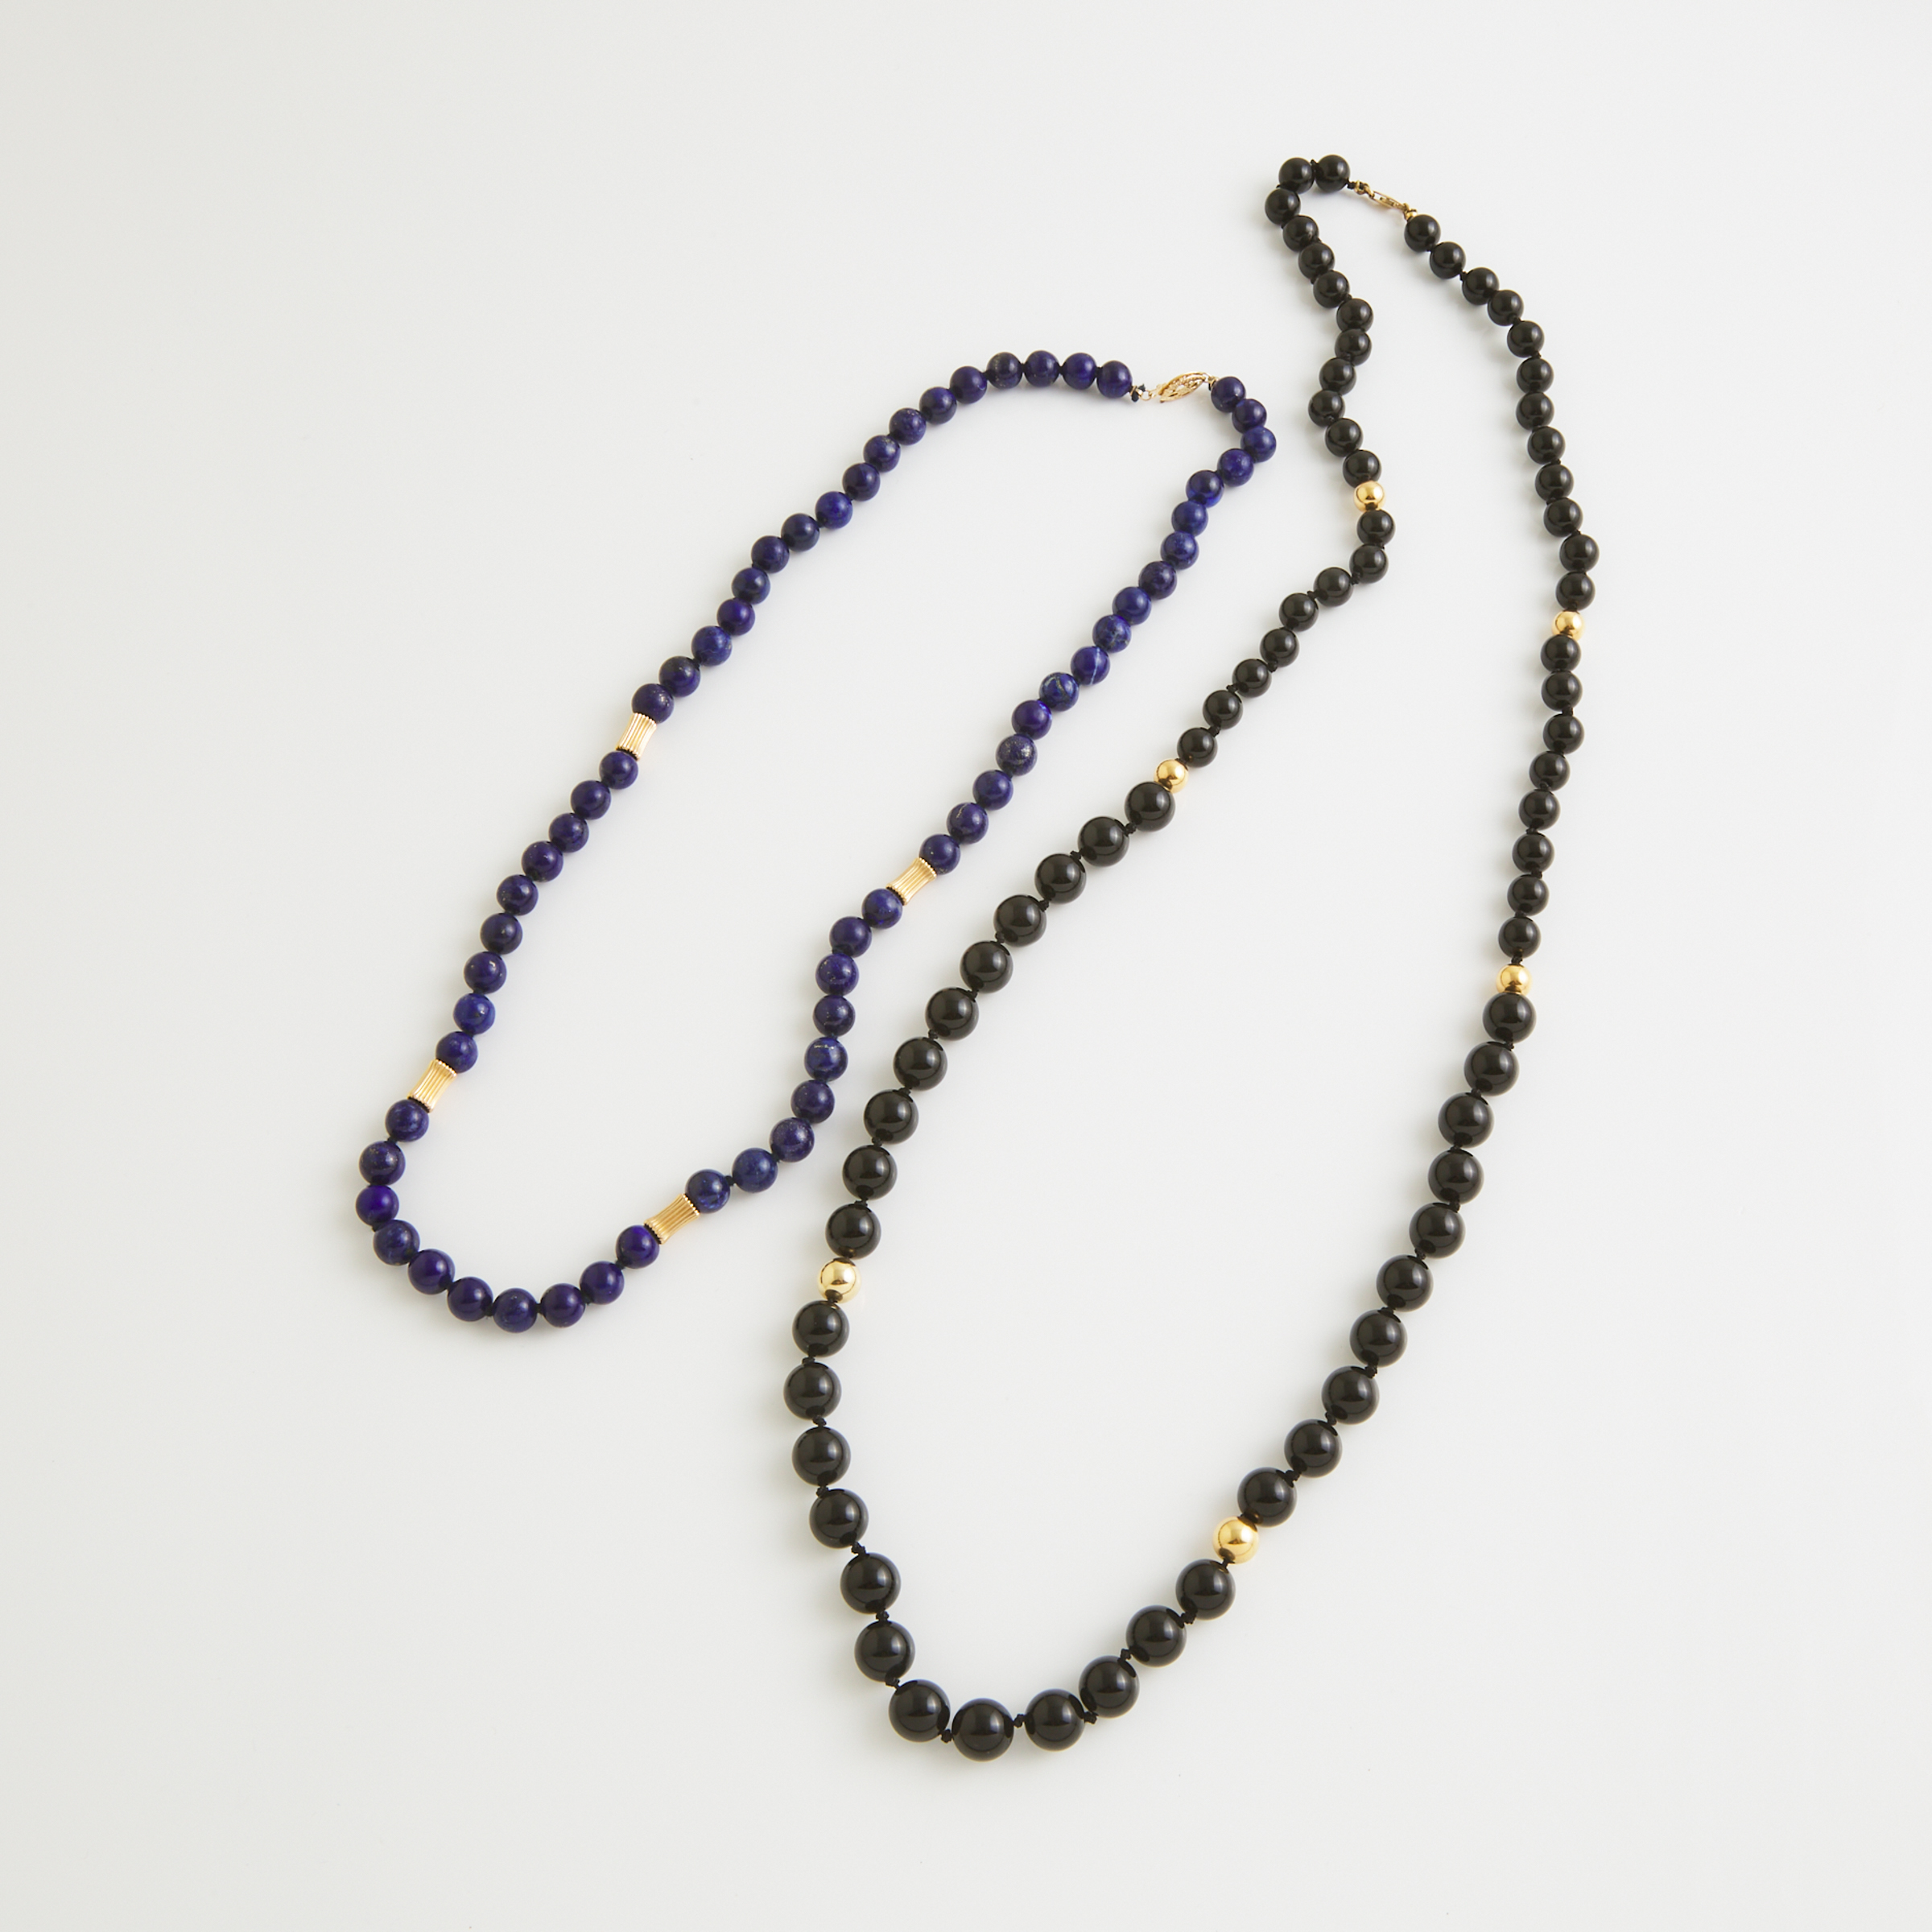 Two Single Strand Bead Necklaces